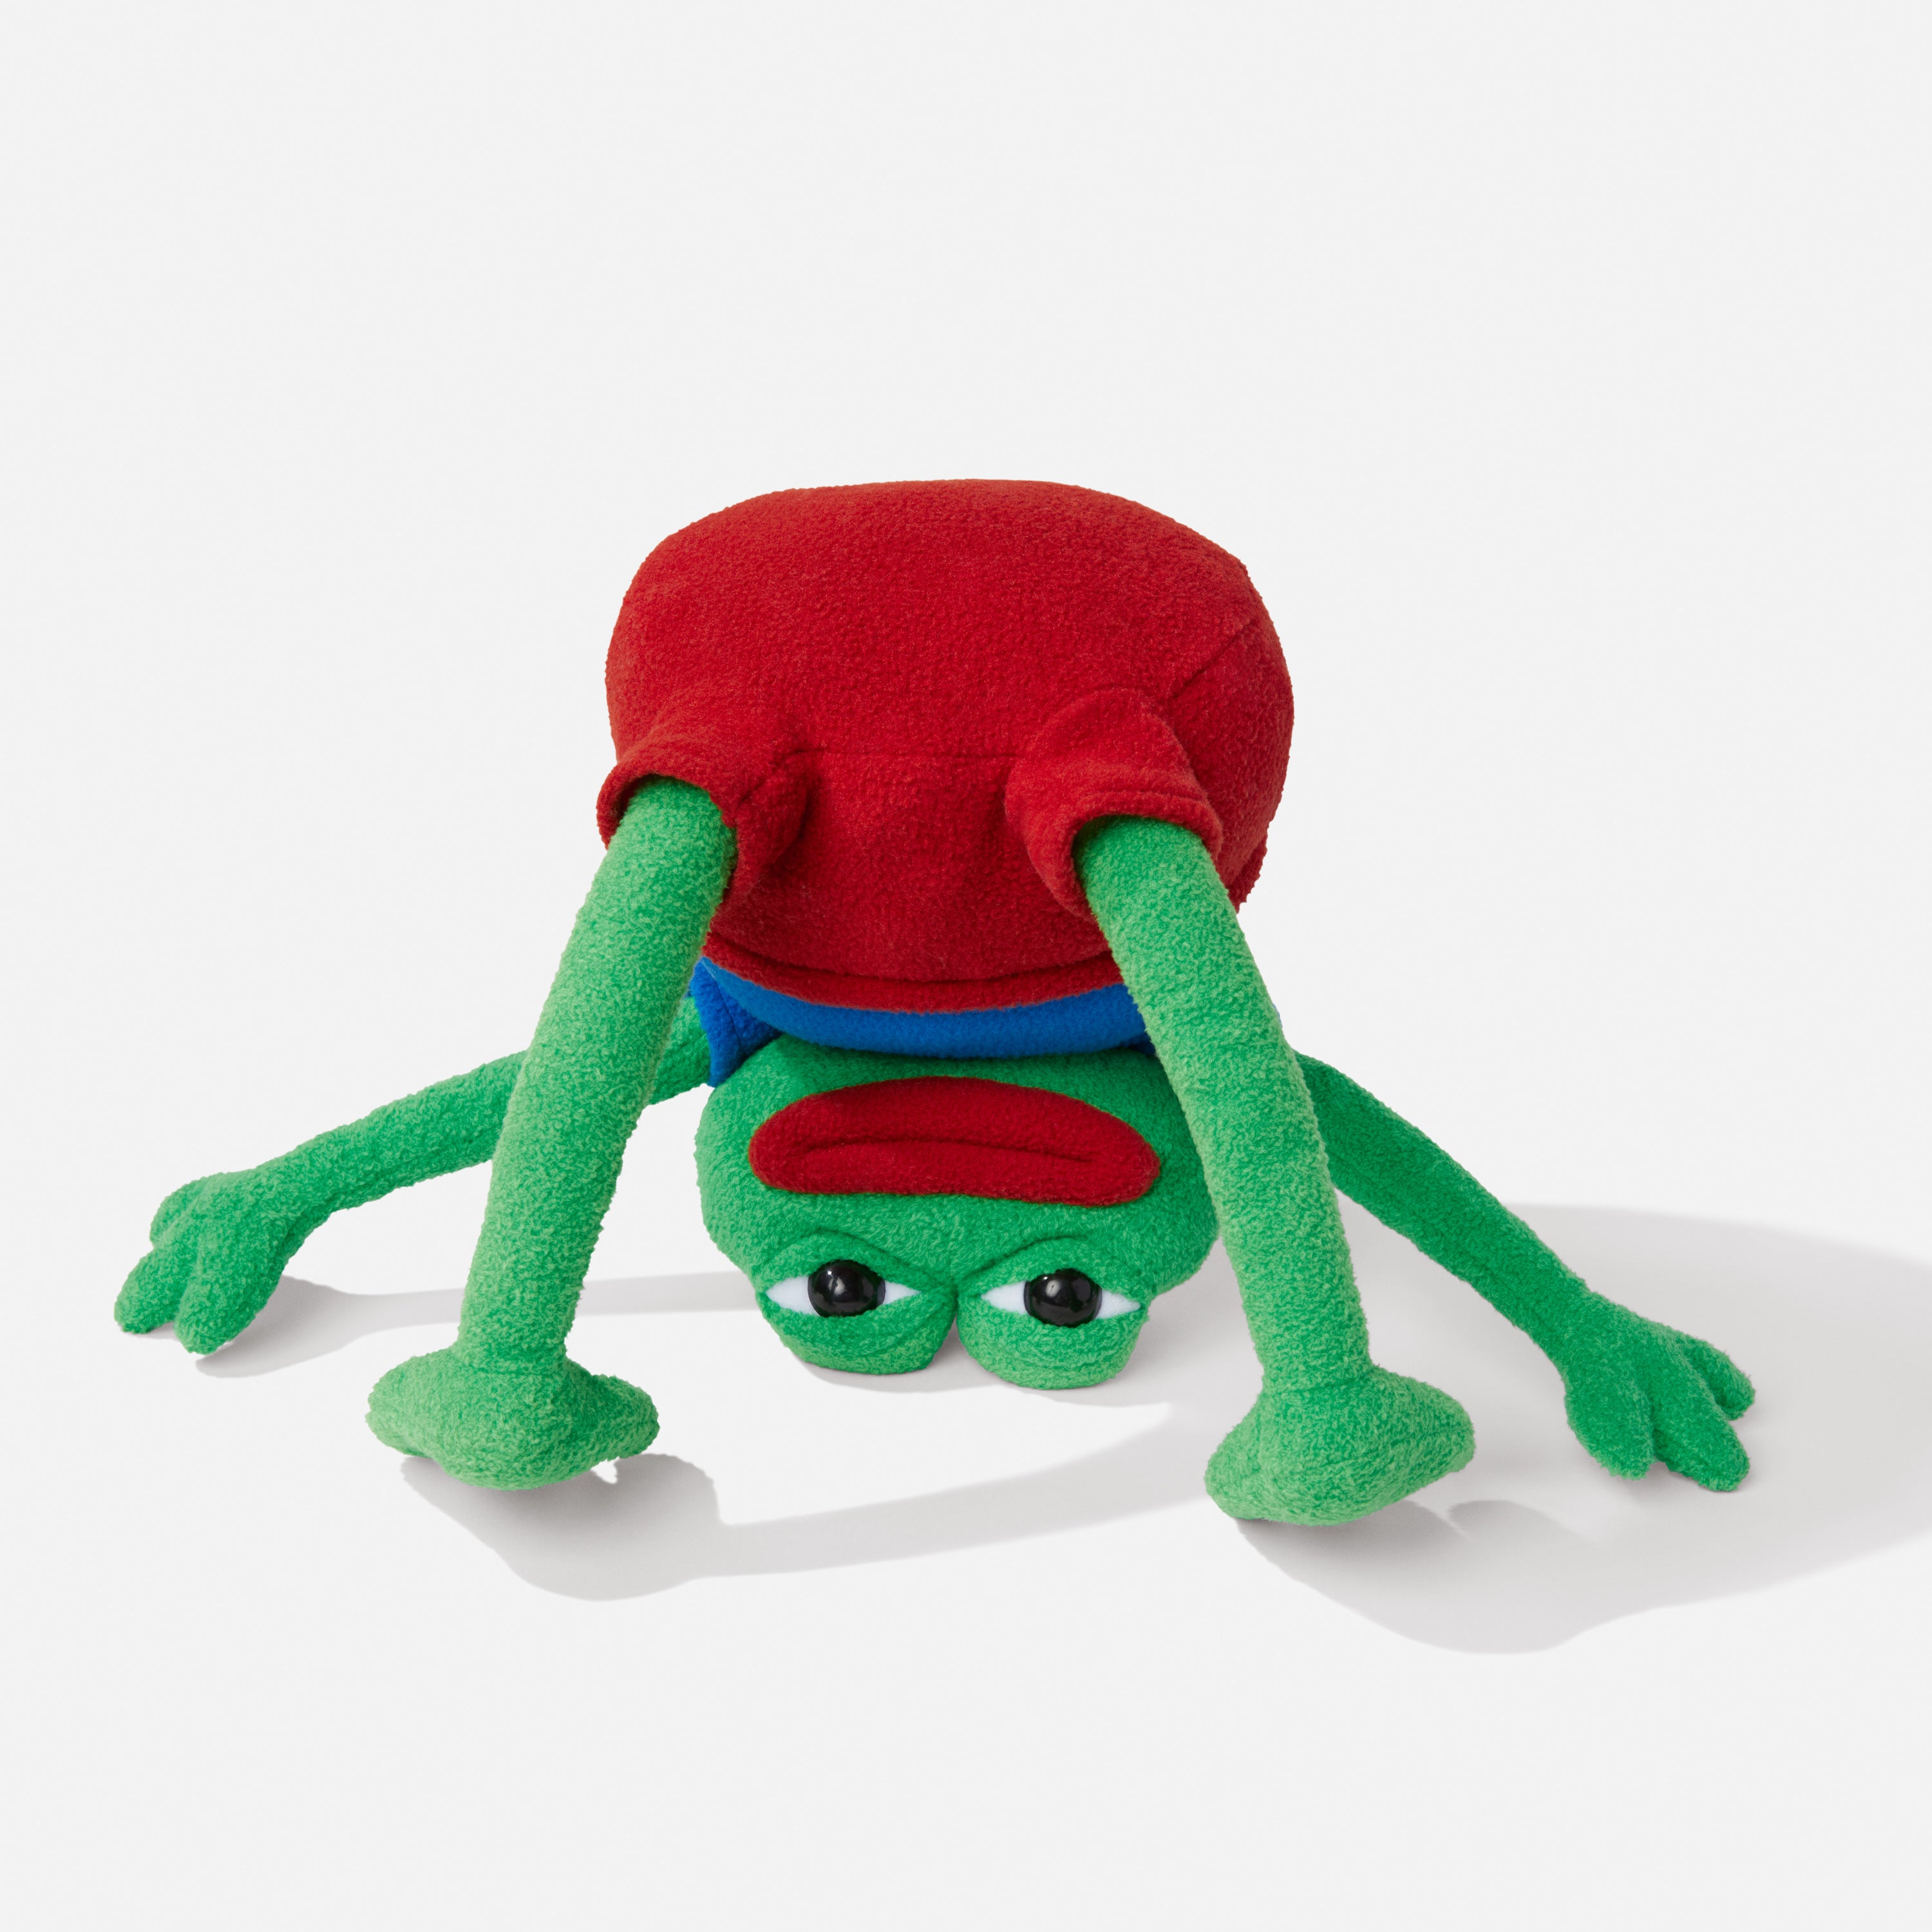 Hashtag Collectibles Pepe The Frog - The Official Plush Doll (Anatomically Correct)